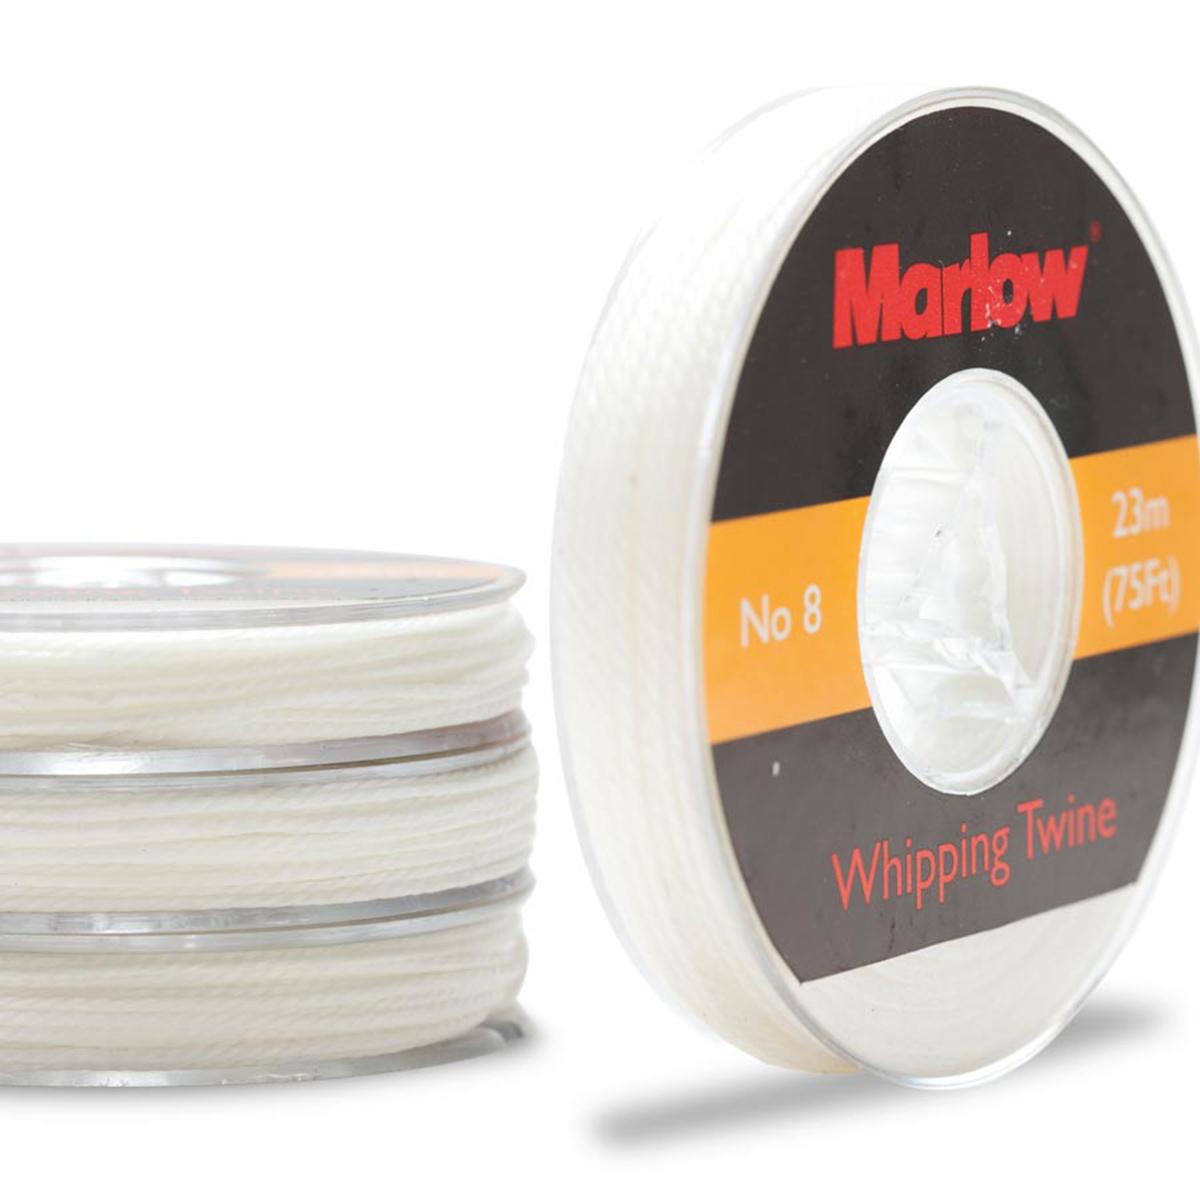 Marlow Waxed Whipping Twine